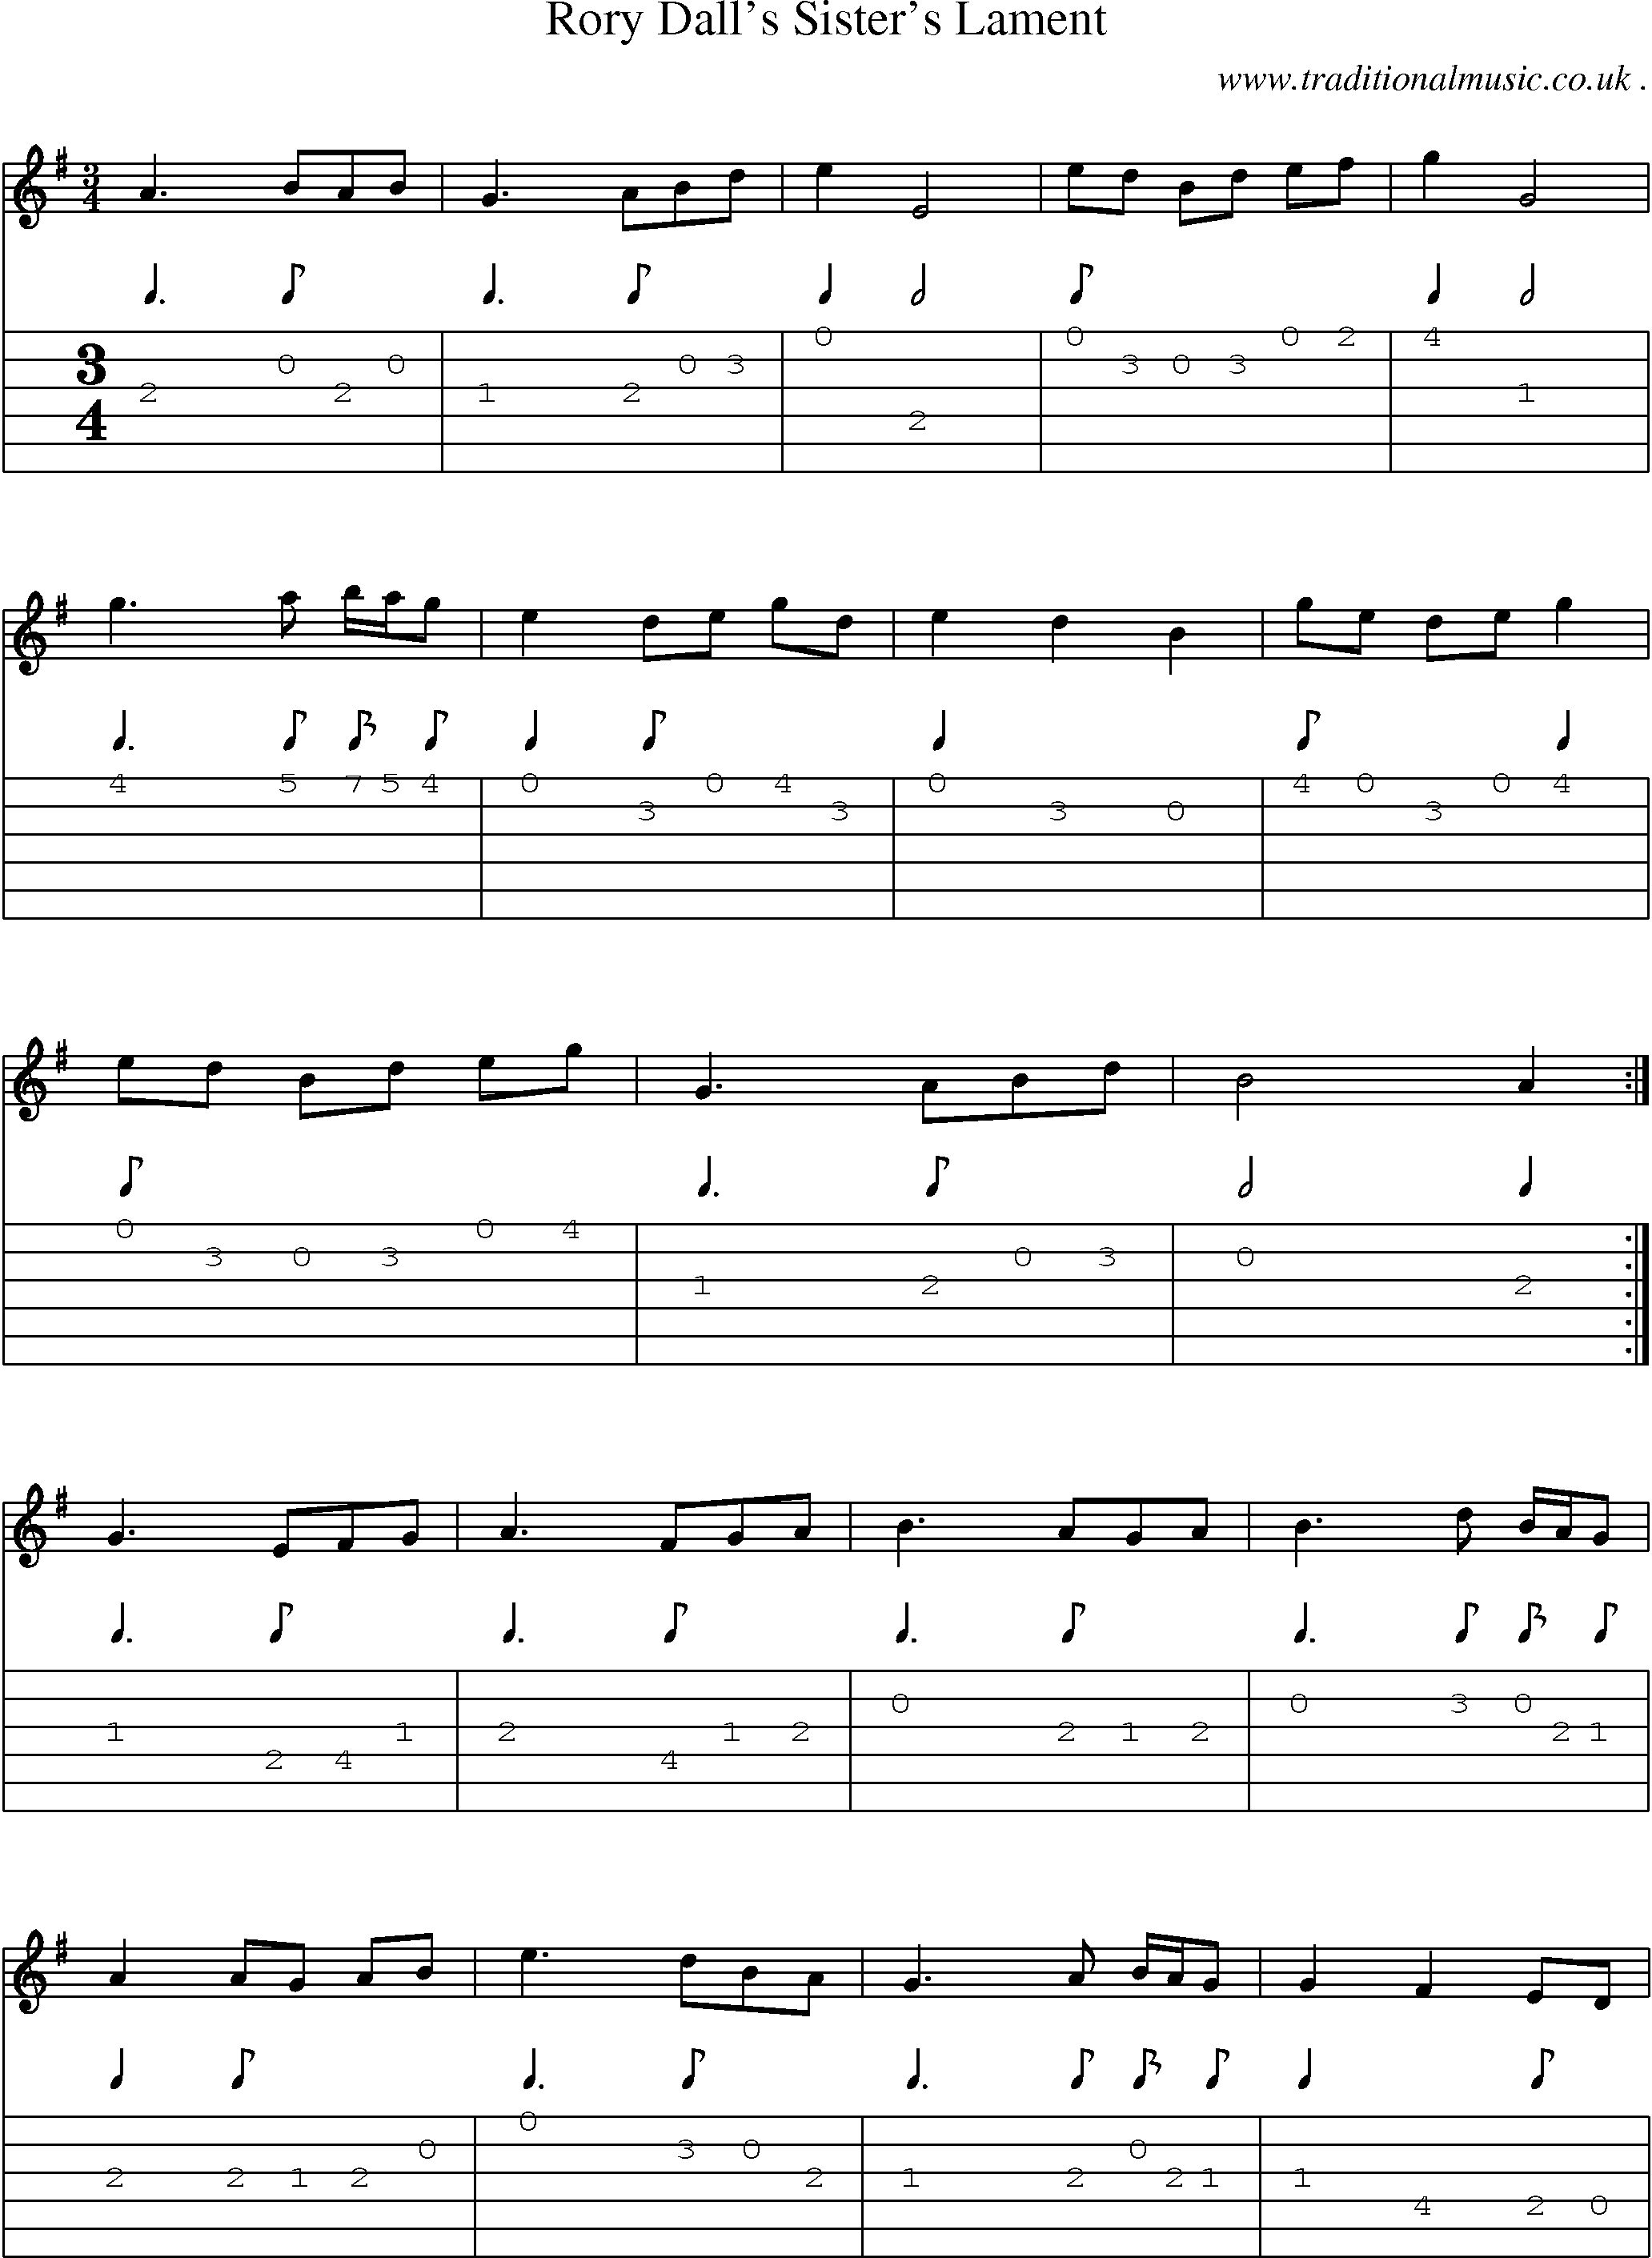 Sheet-music  score, Chords and Guitar Tabs for Rory Dalls Sisters Lament